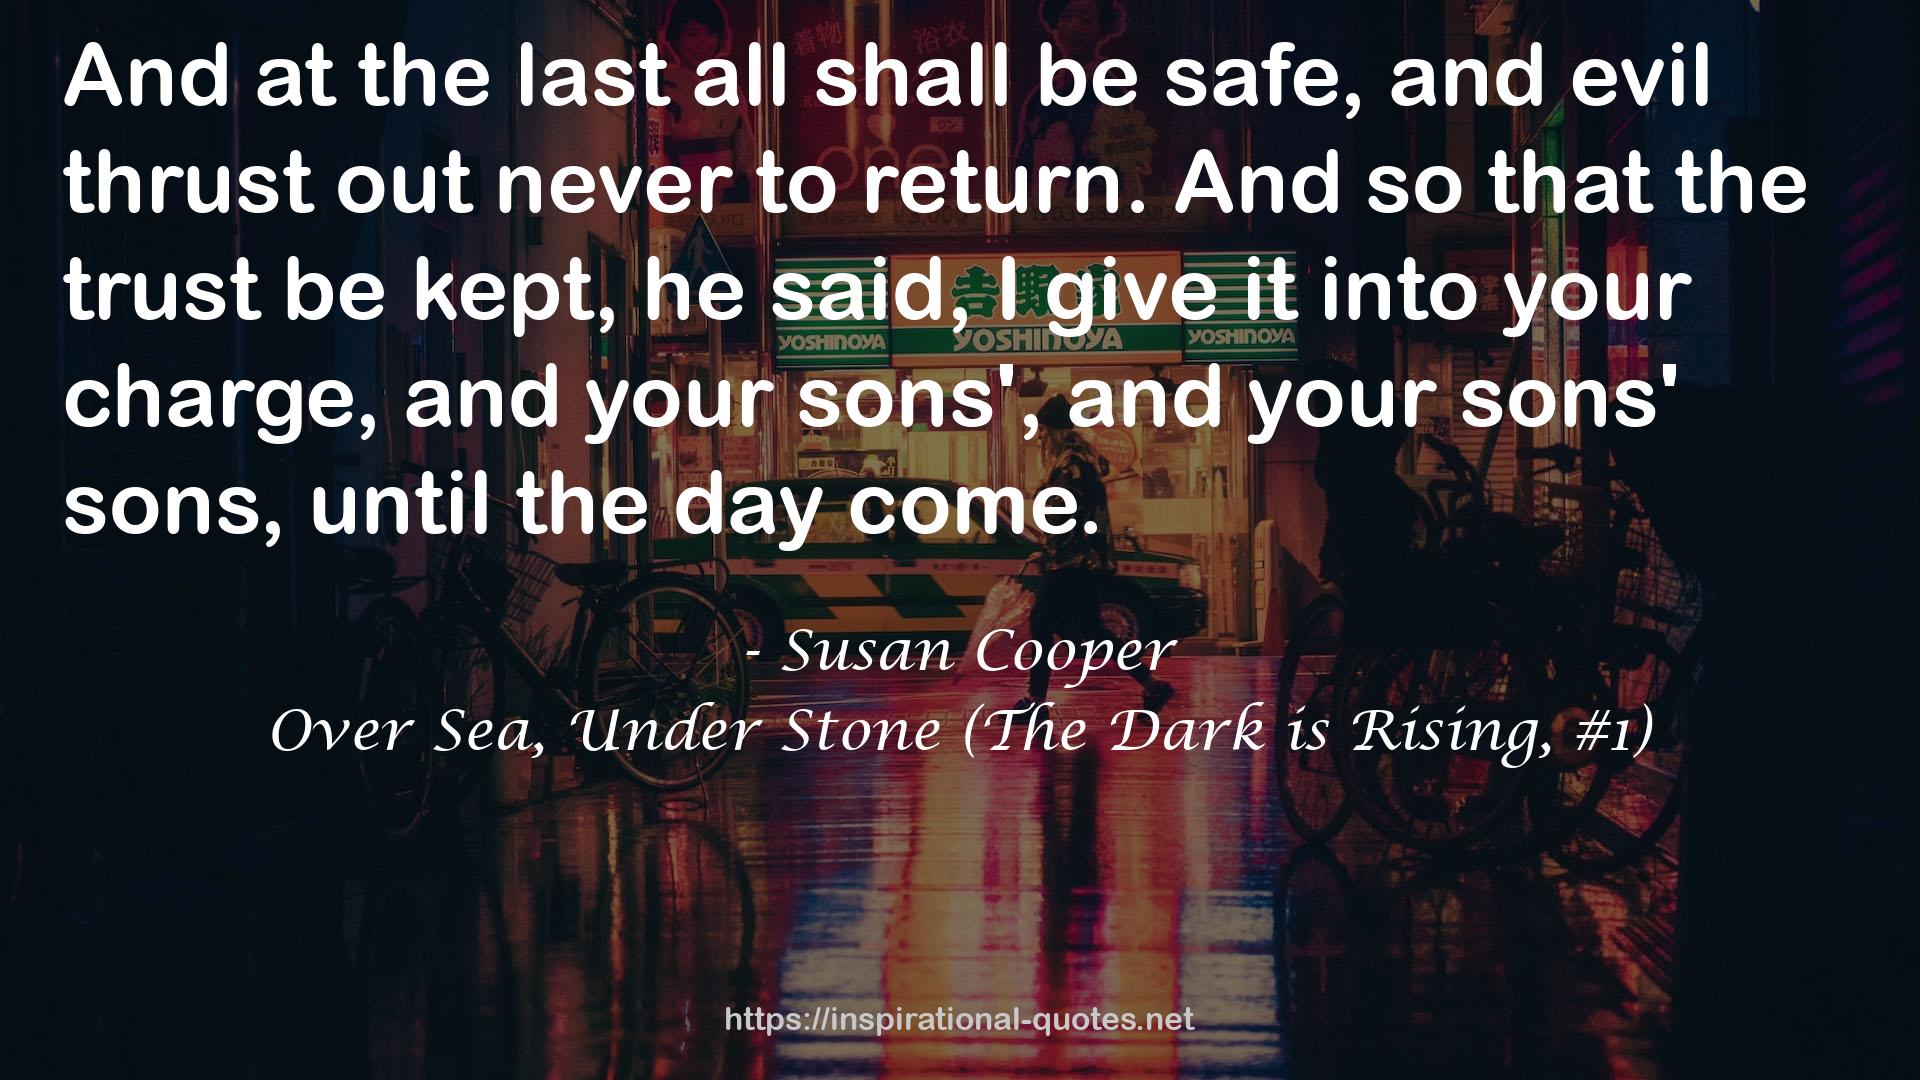 Over Sea, Under Stone (The Dark is Rising, #1) QUOTES